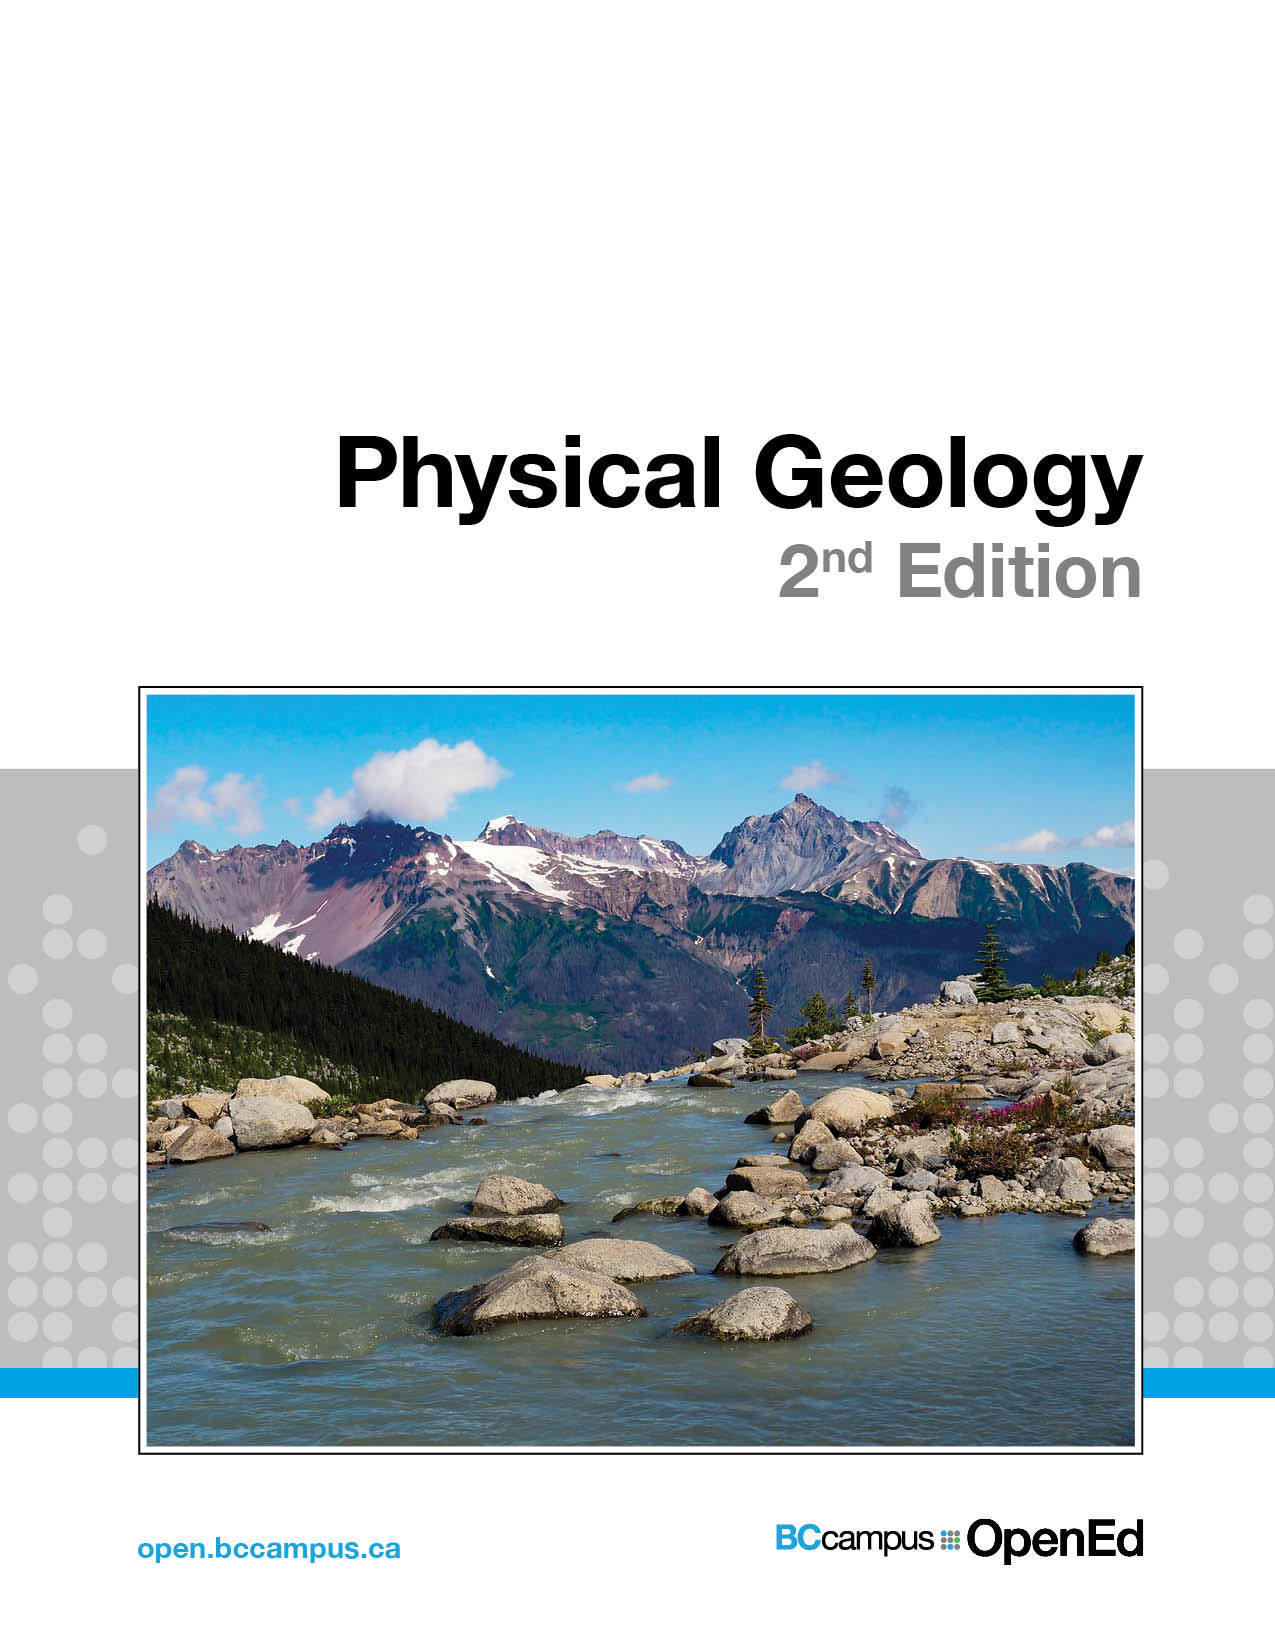 Physical Geology - 2nd Edition